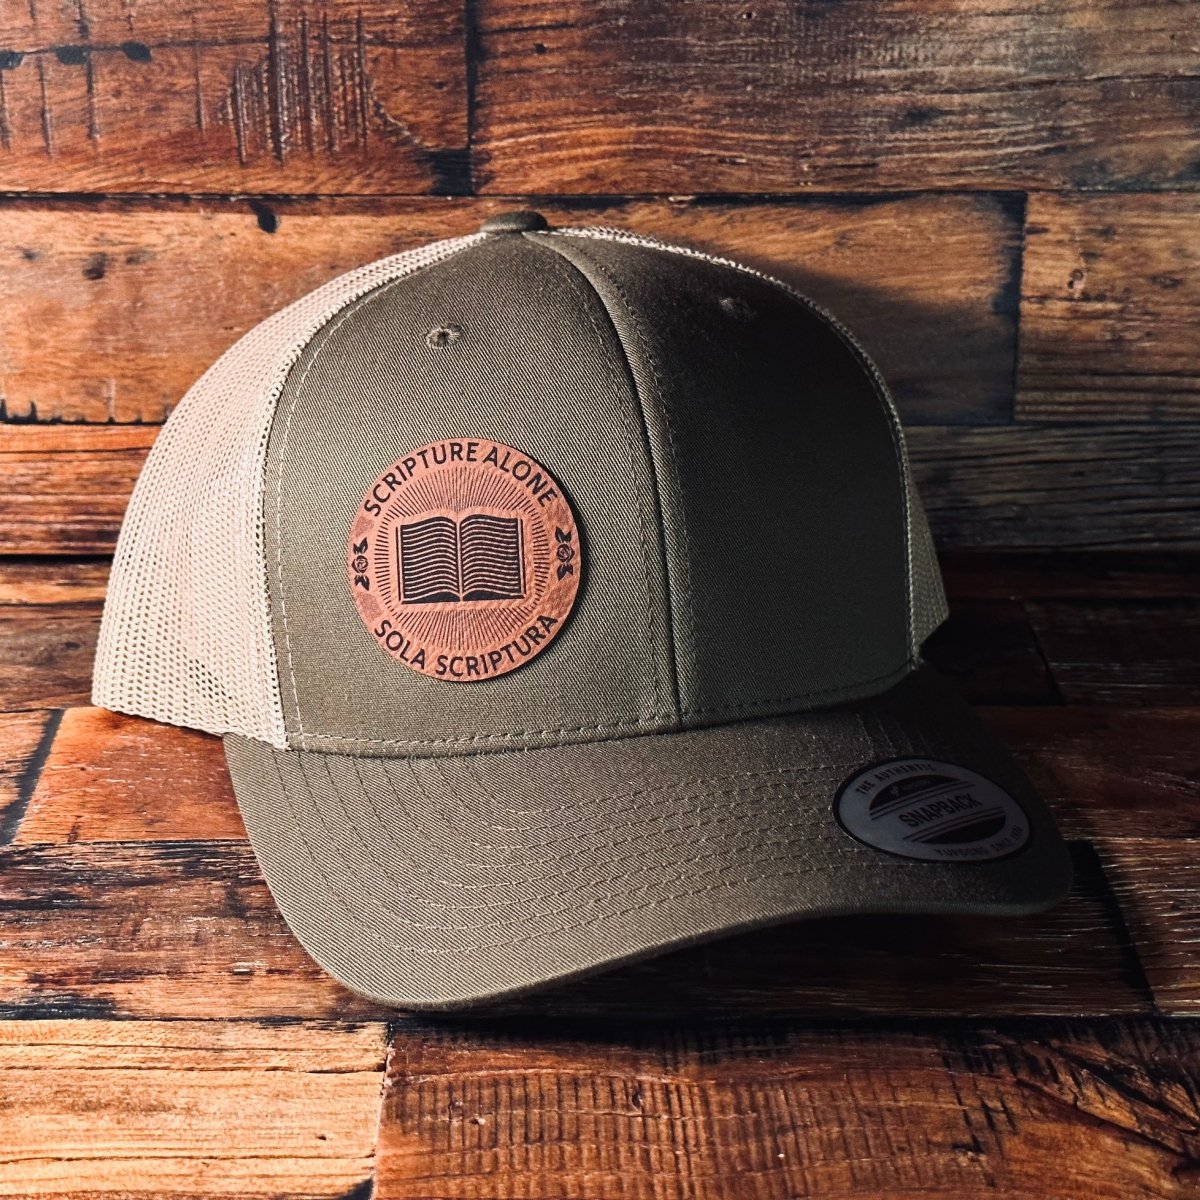 Hat - Sola Scriptura Seal - Patch Hat - The Reformed Sage - #reformed# - #reformed_gifts# - #christian_gifts#